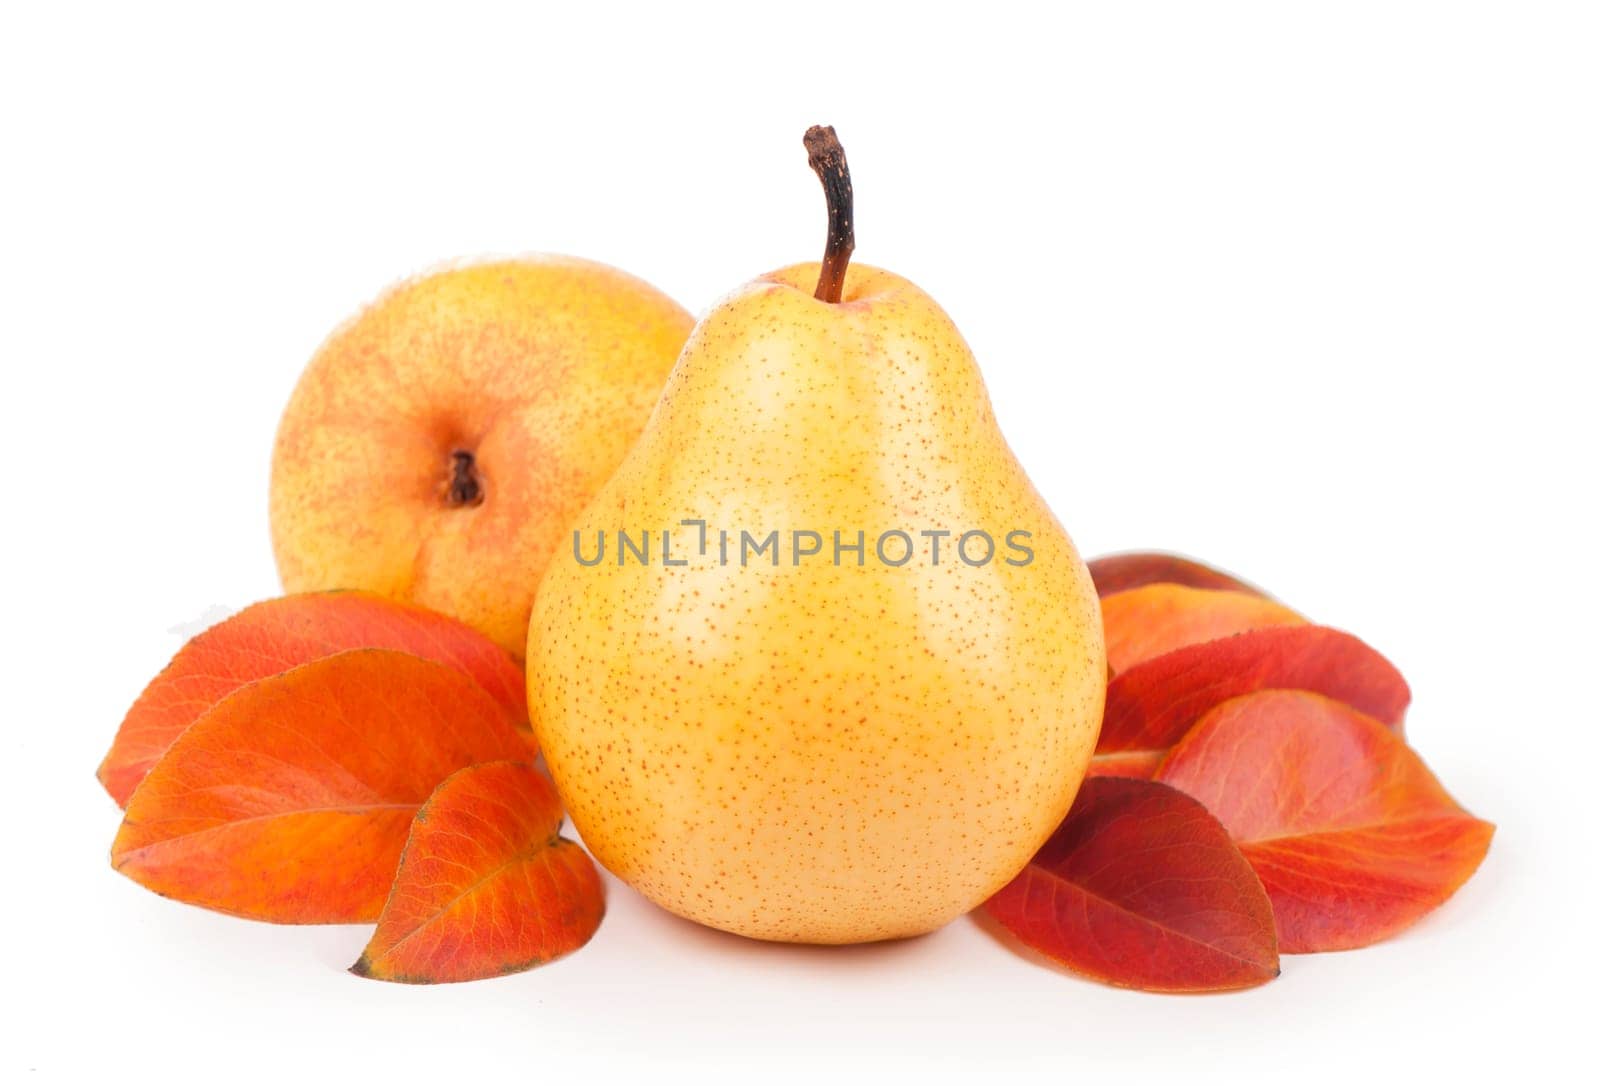 Fresh ripe fruits of pears with leaves isolated on white background.